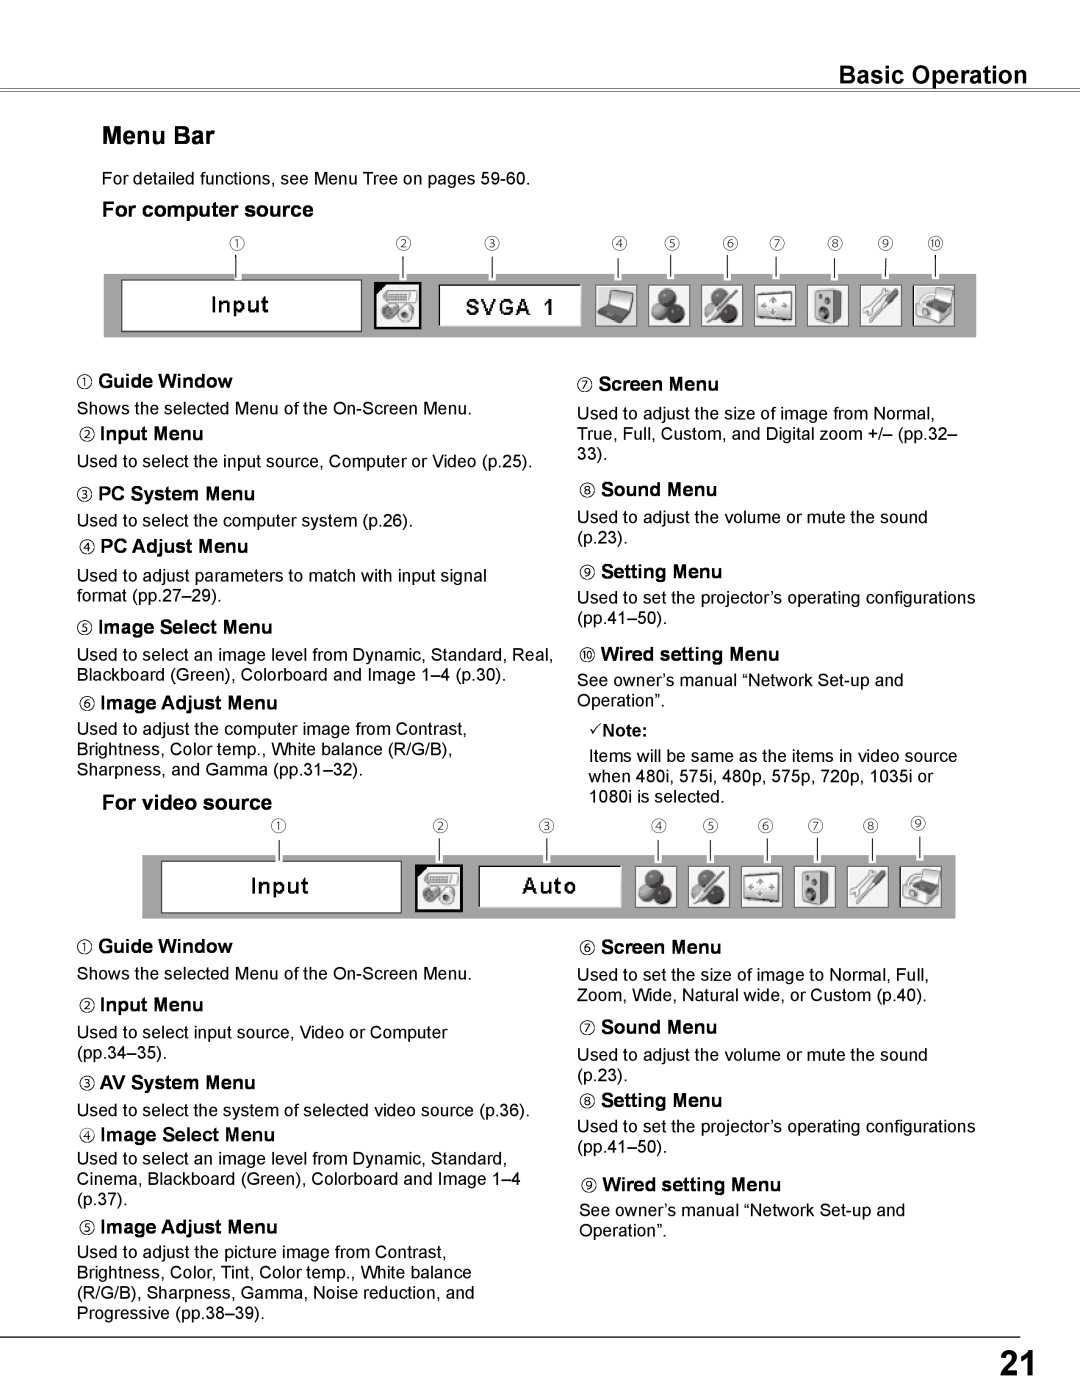 Sanyo PLC-WXE46 owner manual Menu Bar, Basic Operation, For computer source, For video source 